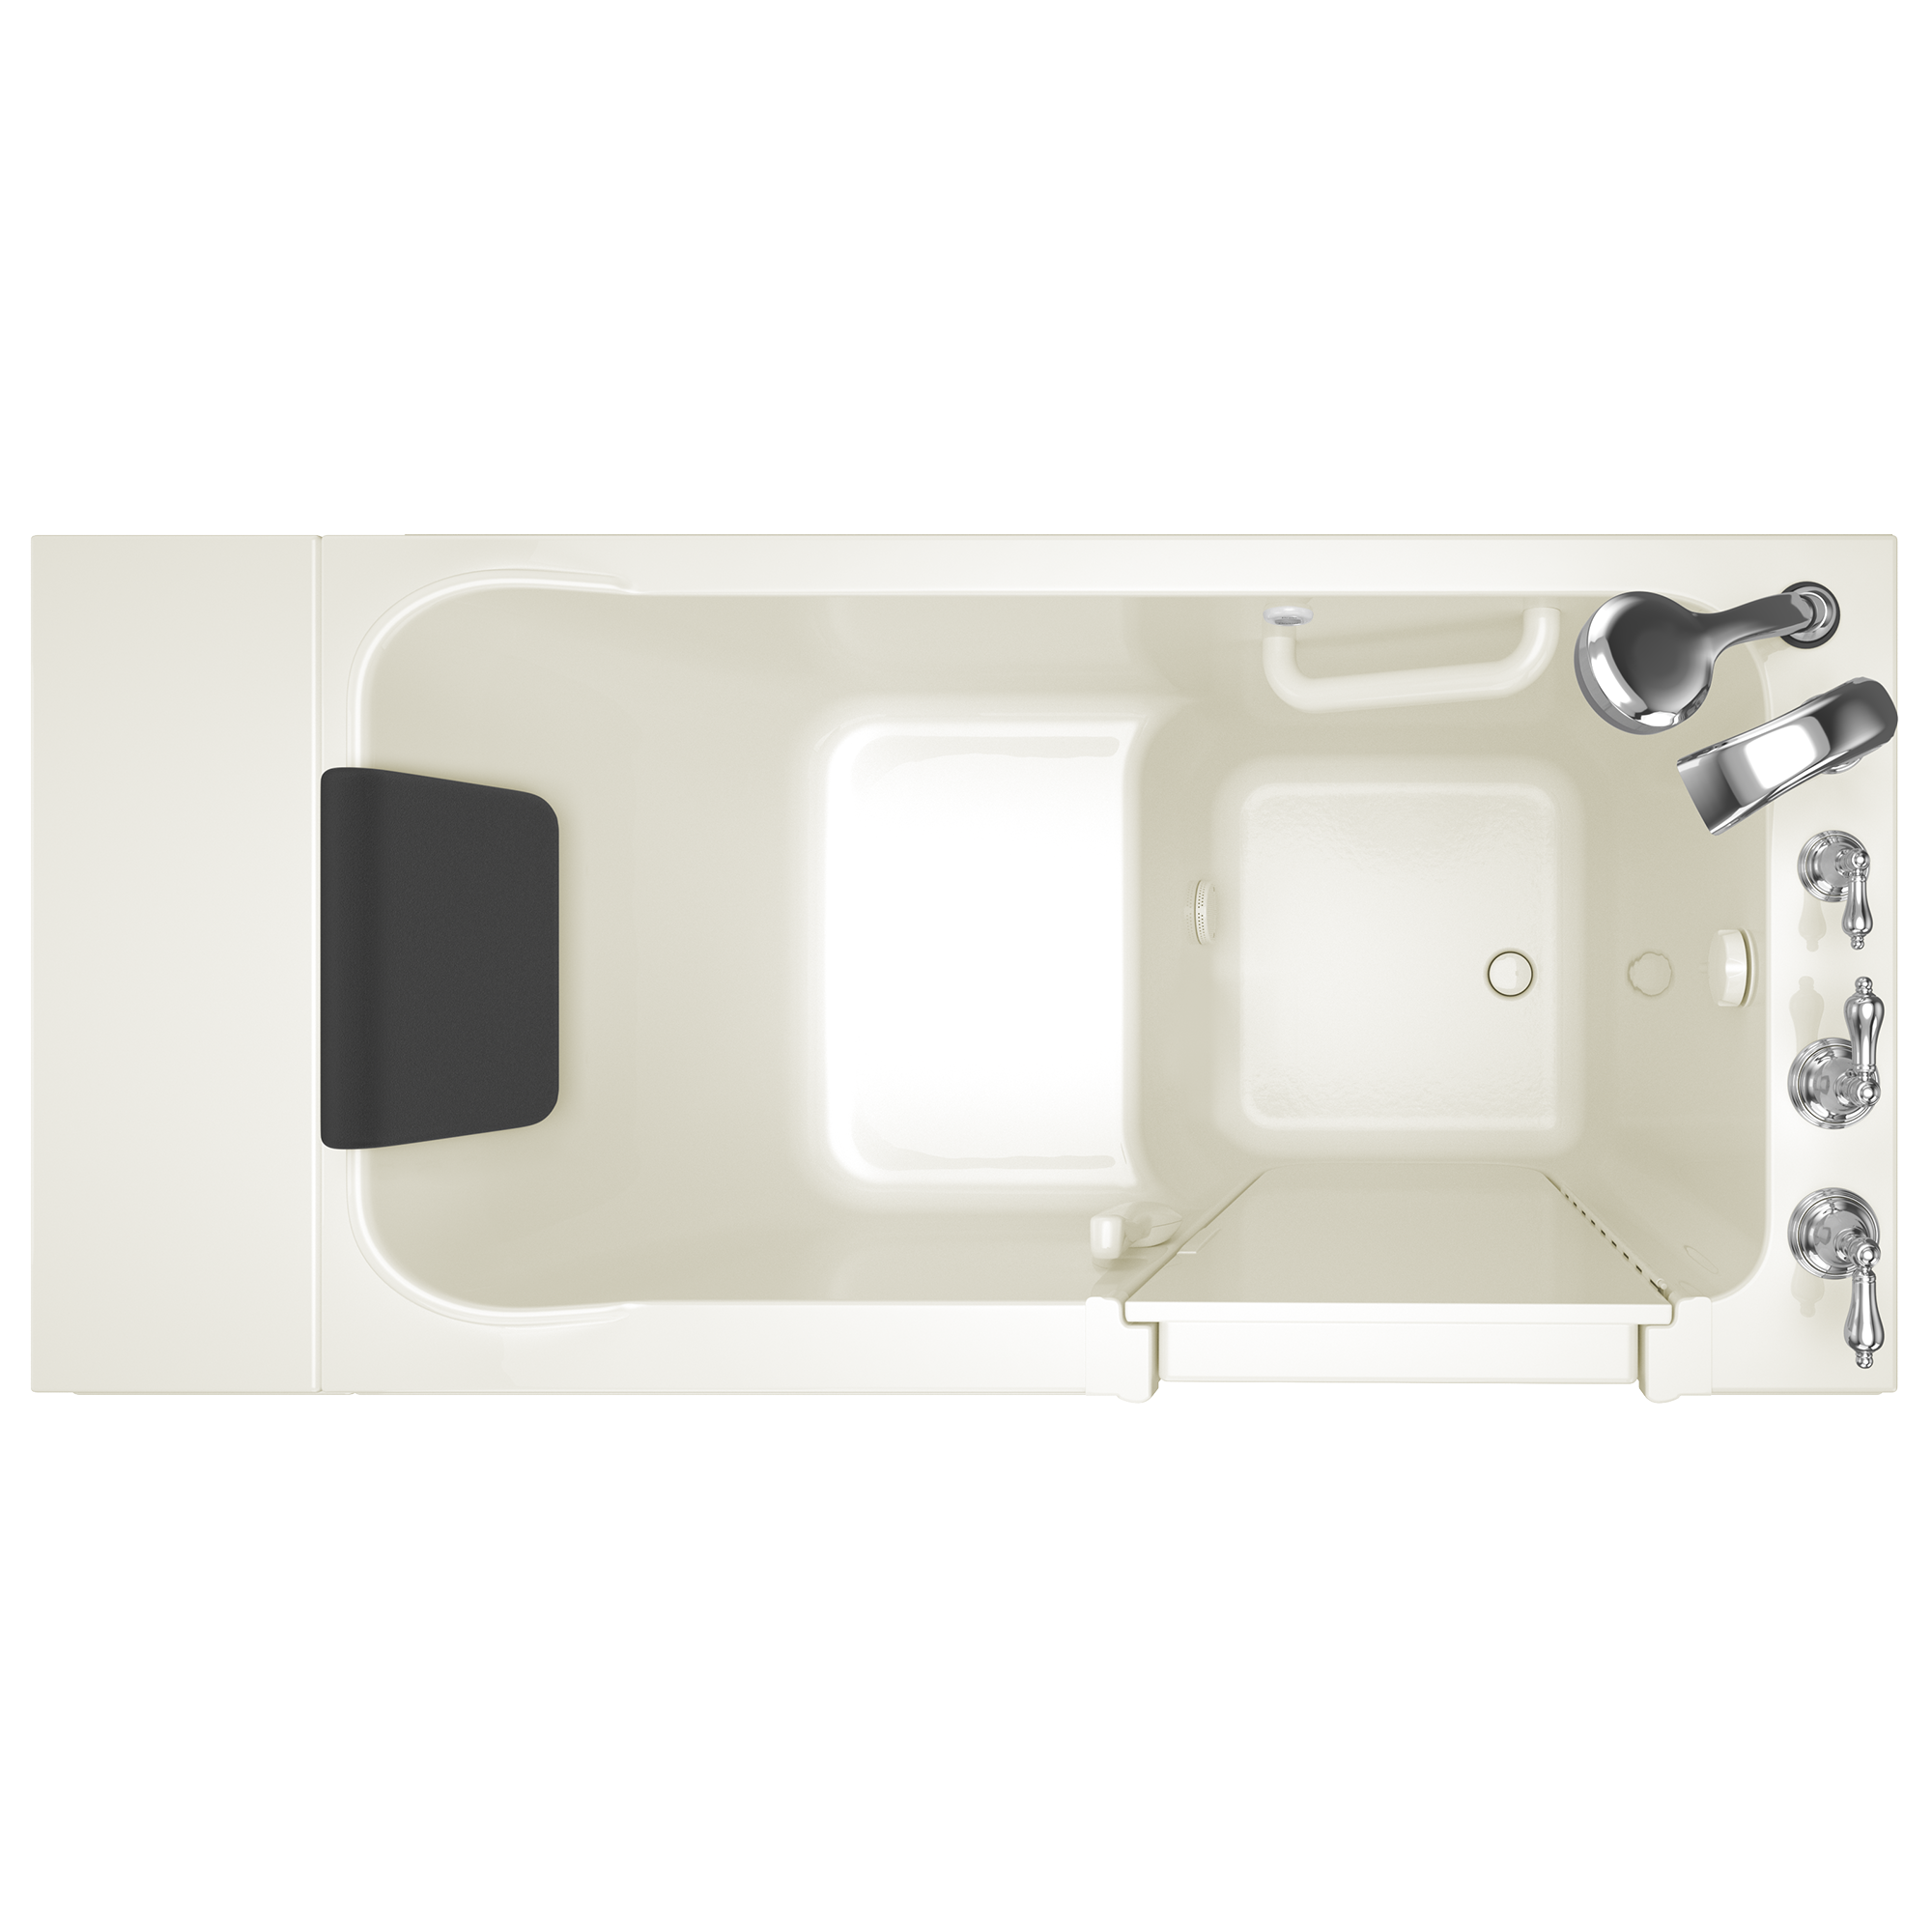 Acrylic Luxury Series 28 x 48-Inch Walk-in Tub With Soaker System - Right-Hand Drain With Faucet